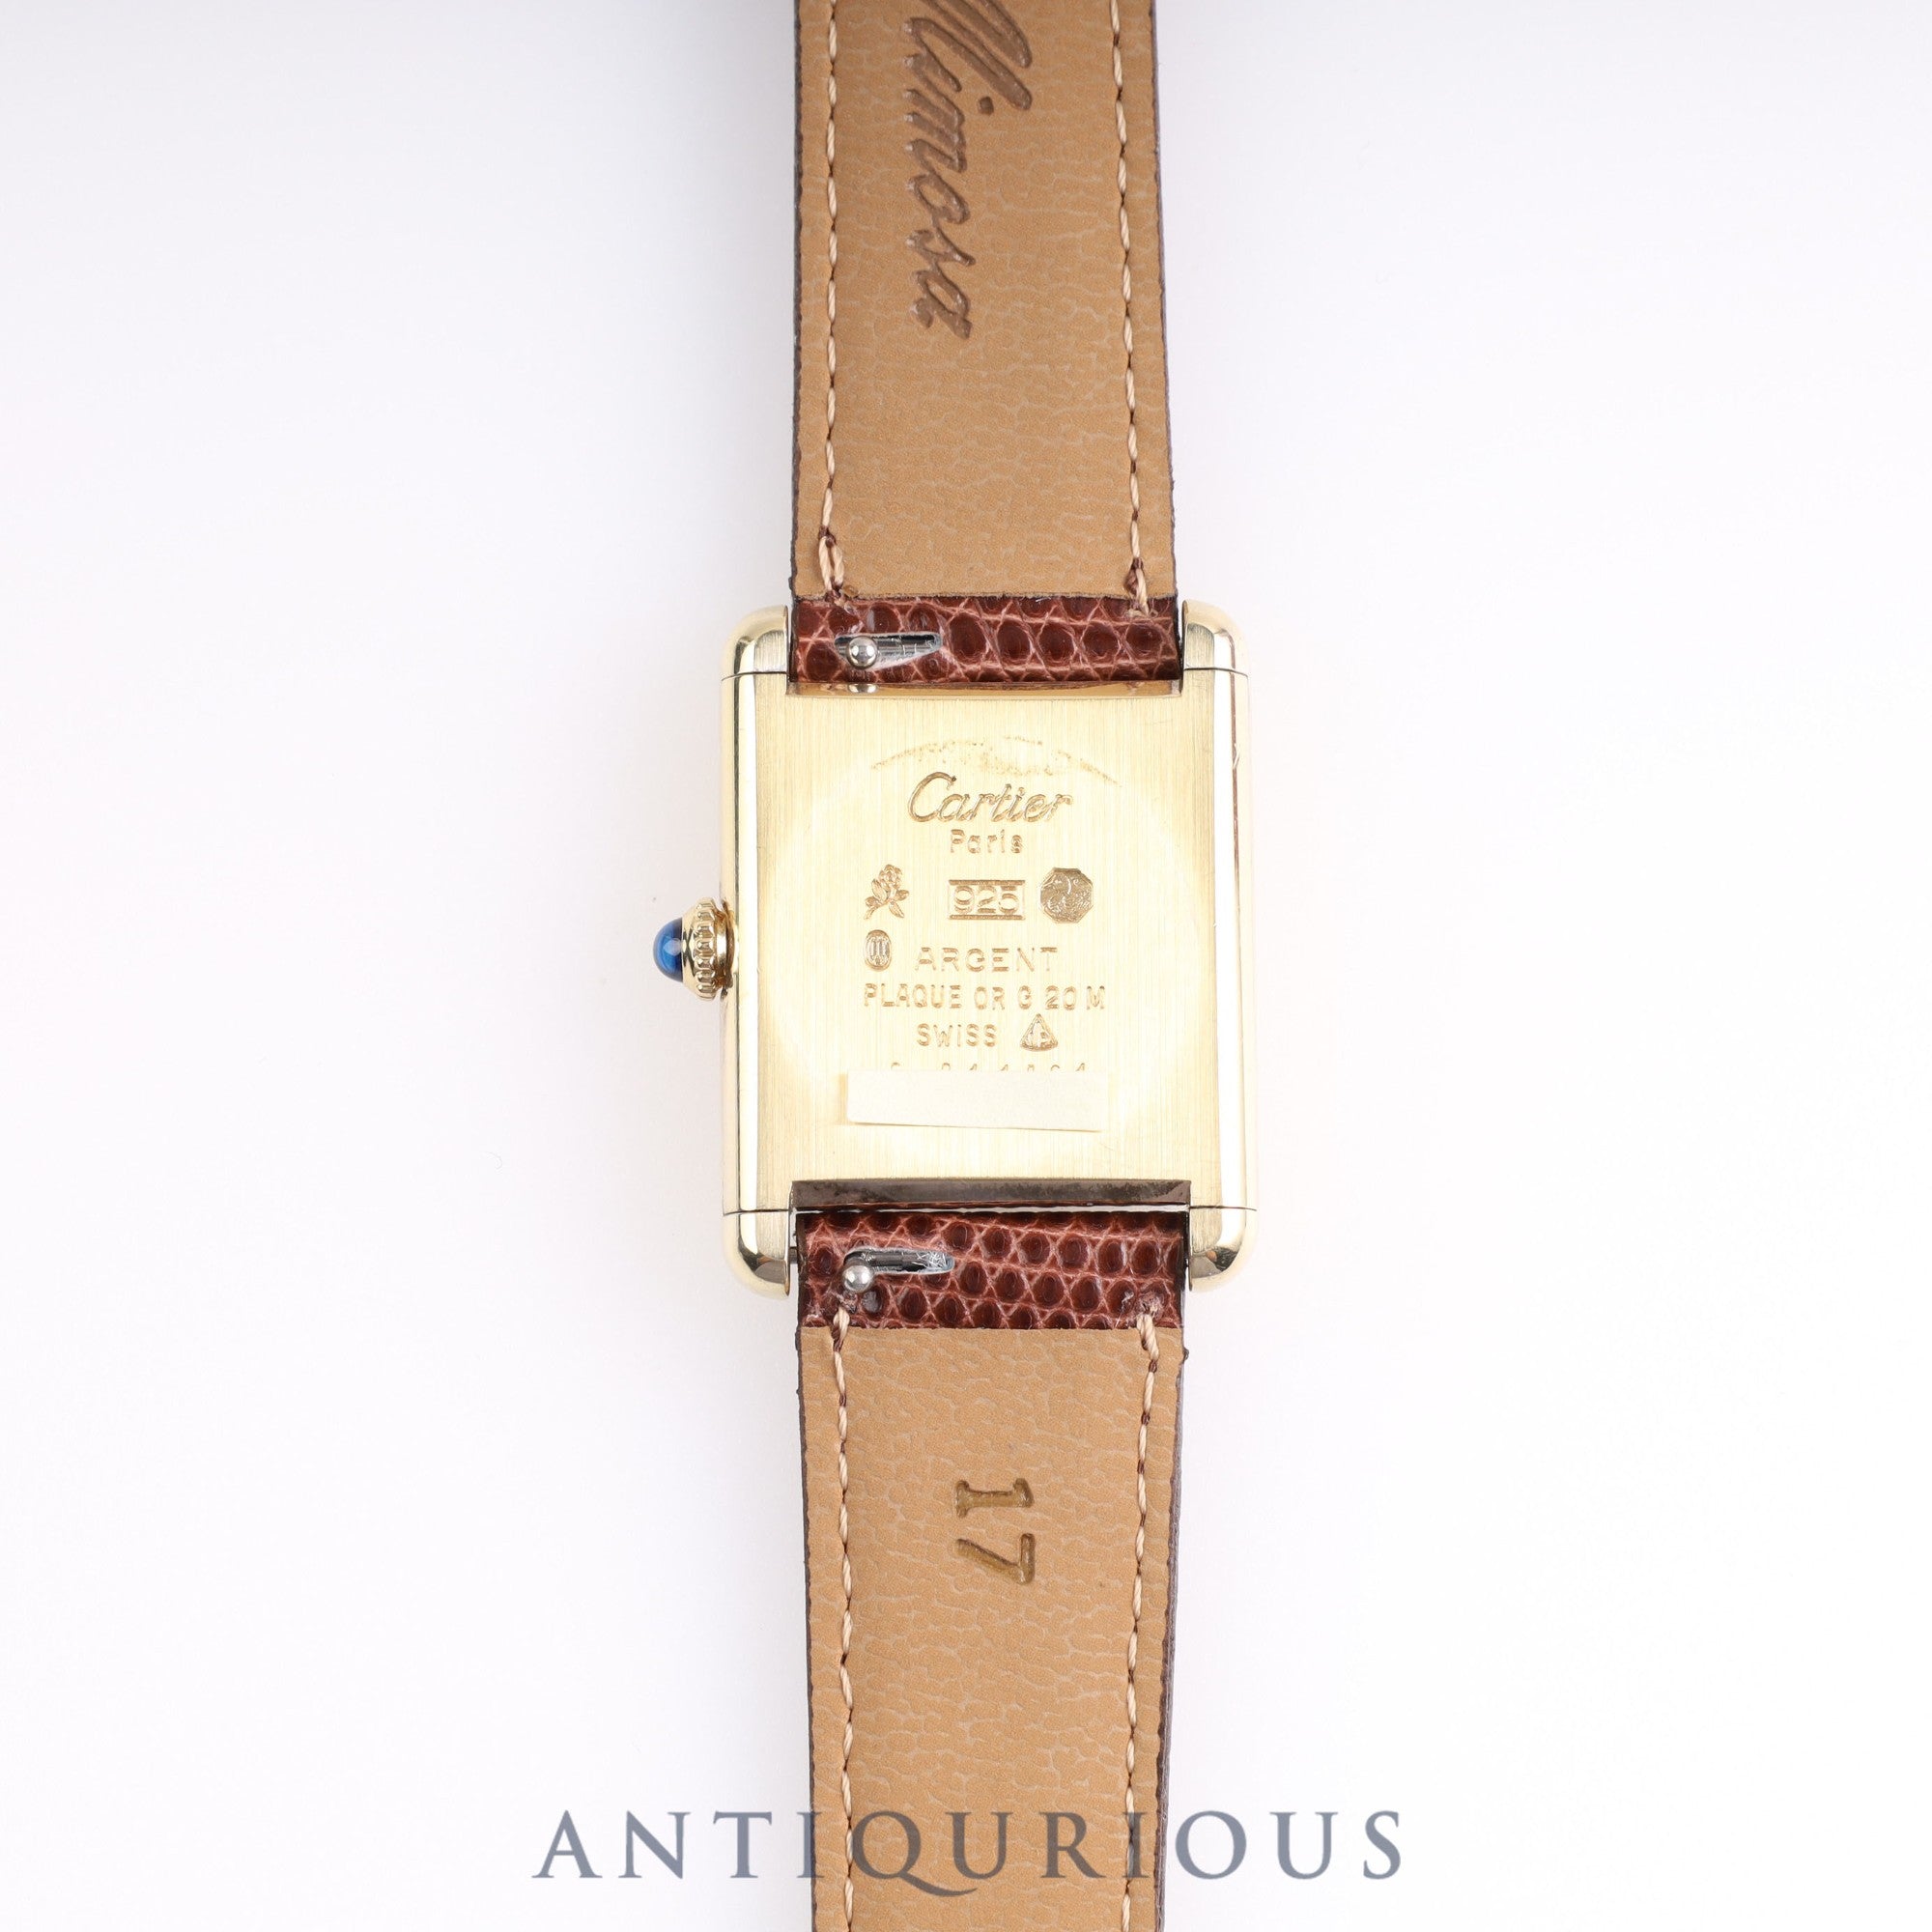 CARTIER Cartier Must Tank LM Manual winding Genuine buckle Mahogany dial Box Cartier boutique complete service